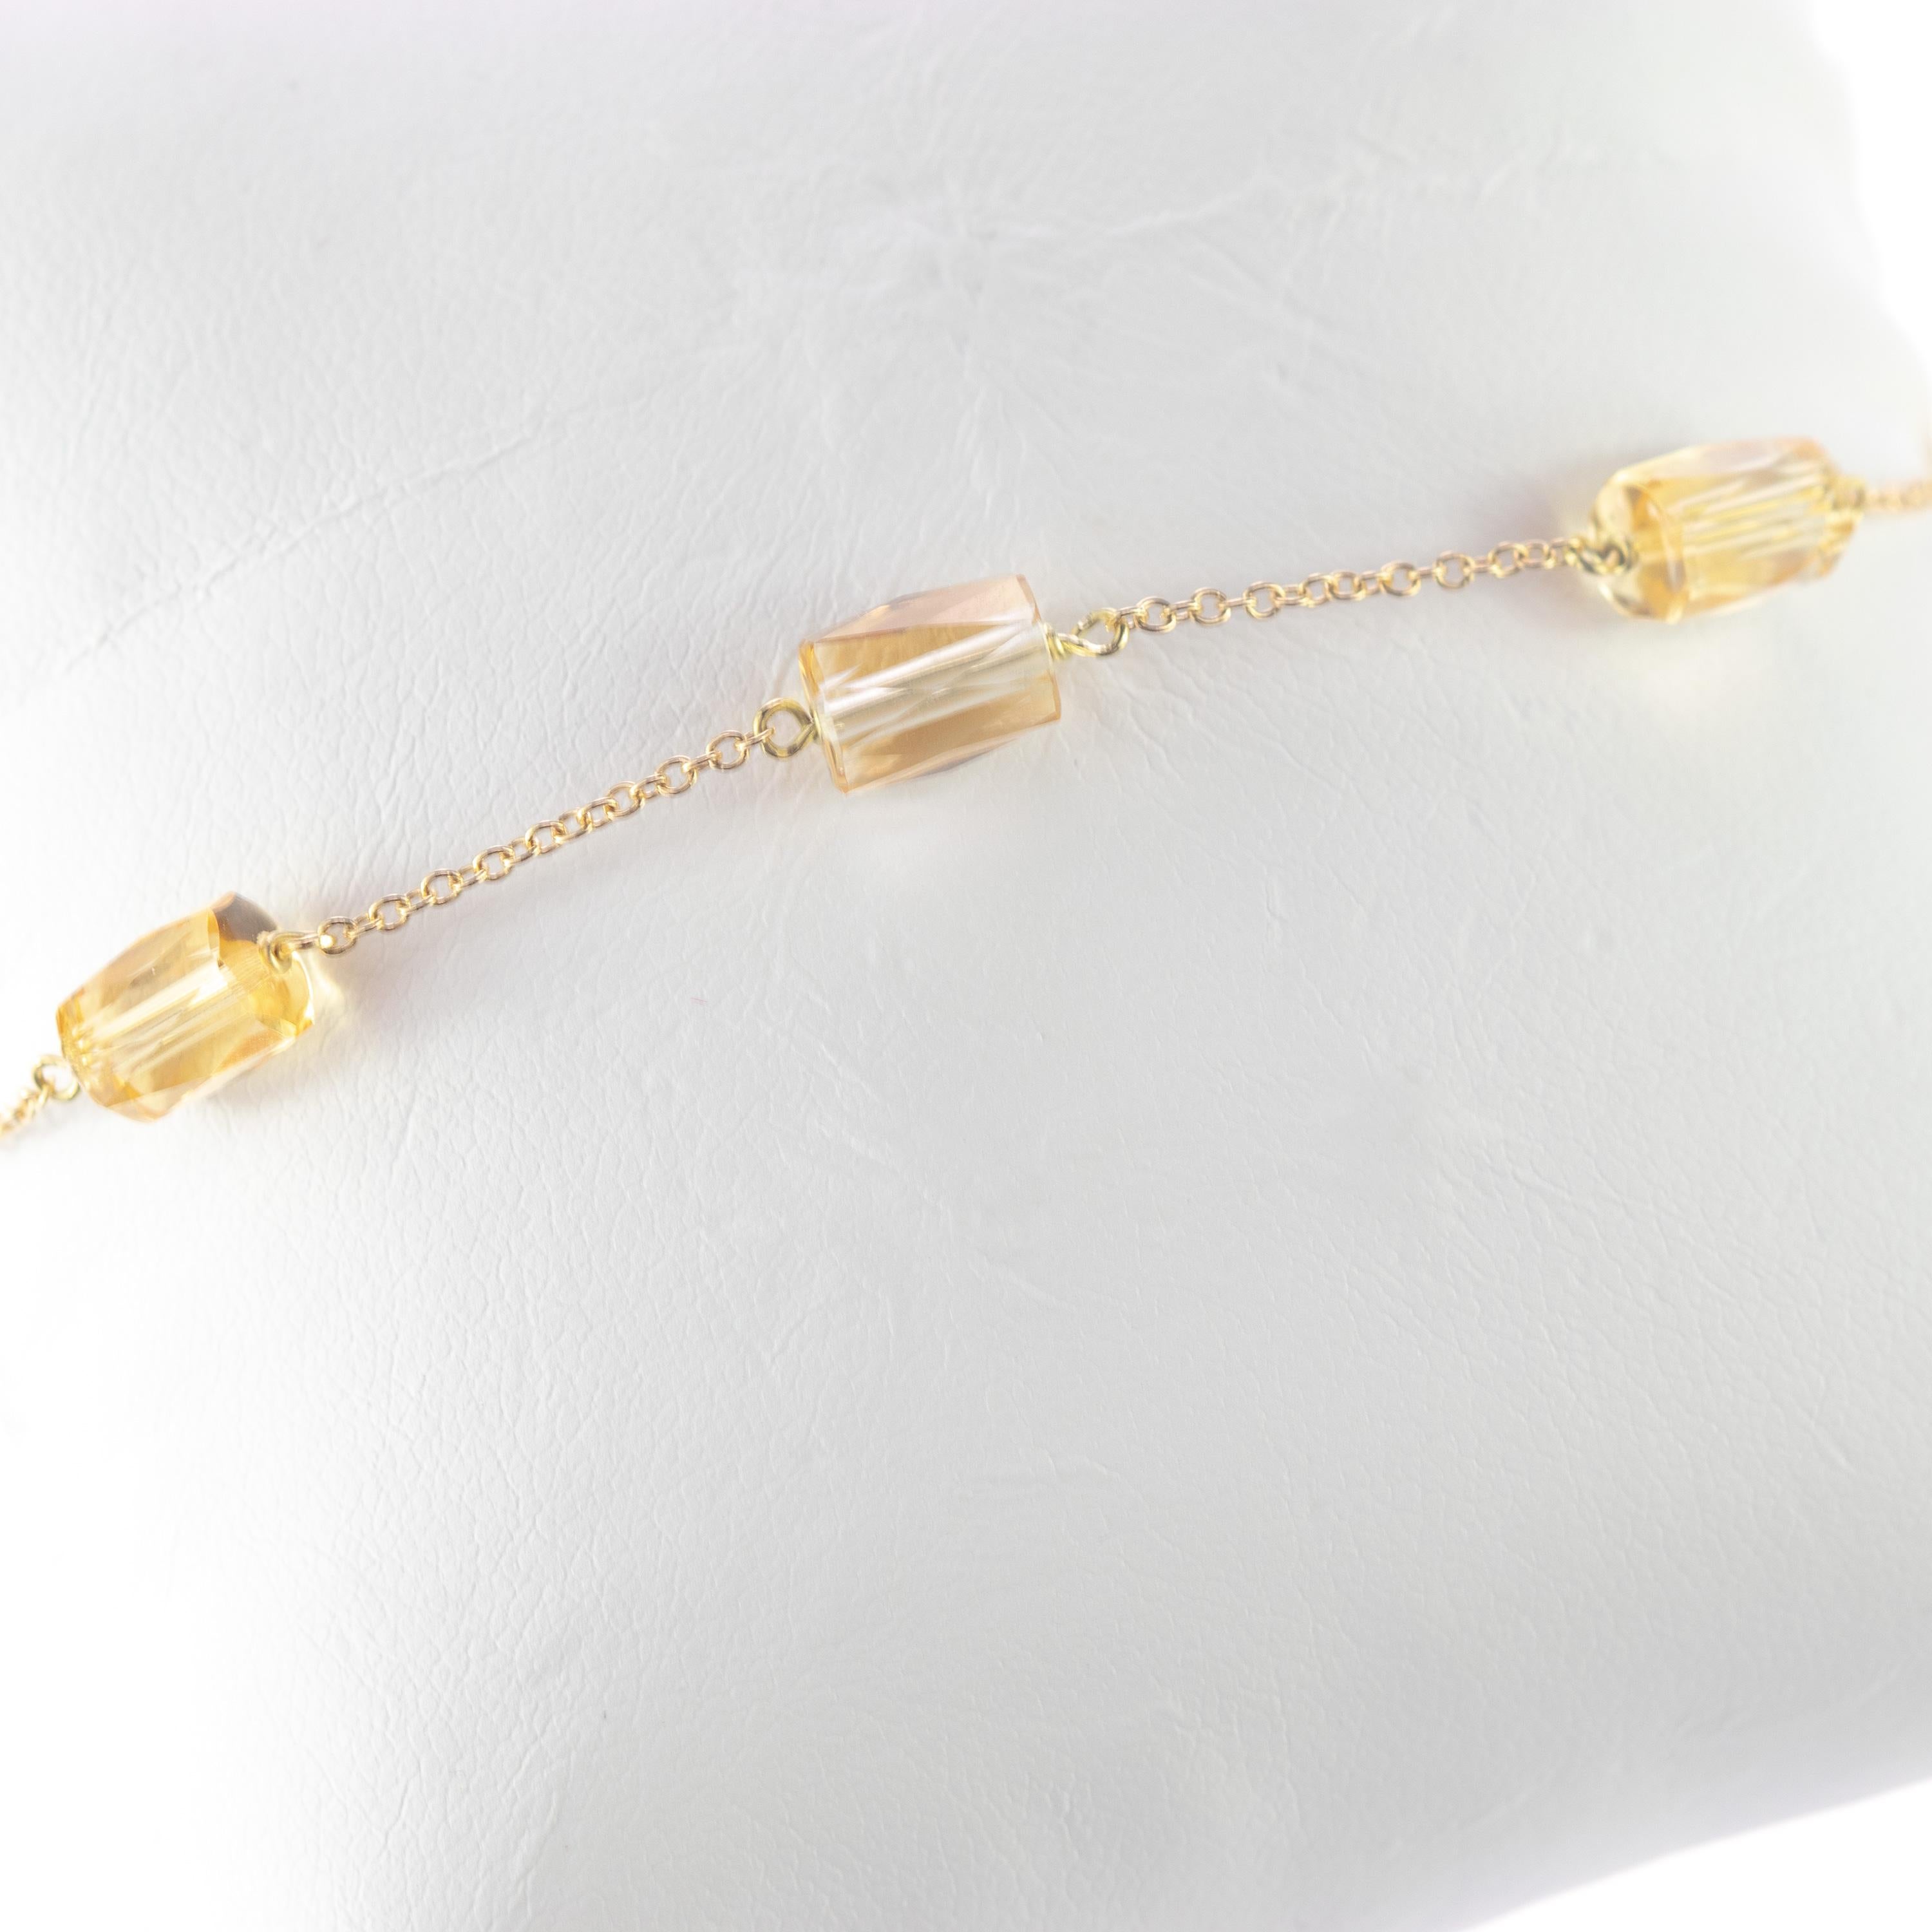 Intini Jewels signature quality on a modern and contemporary design jewel.

Six gems of top quality pure citrine quartz embellish a delicate 18 karat yellow gold chain bracelet.
 
An elegant touch of glamour at your fingertips. Let yourself be